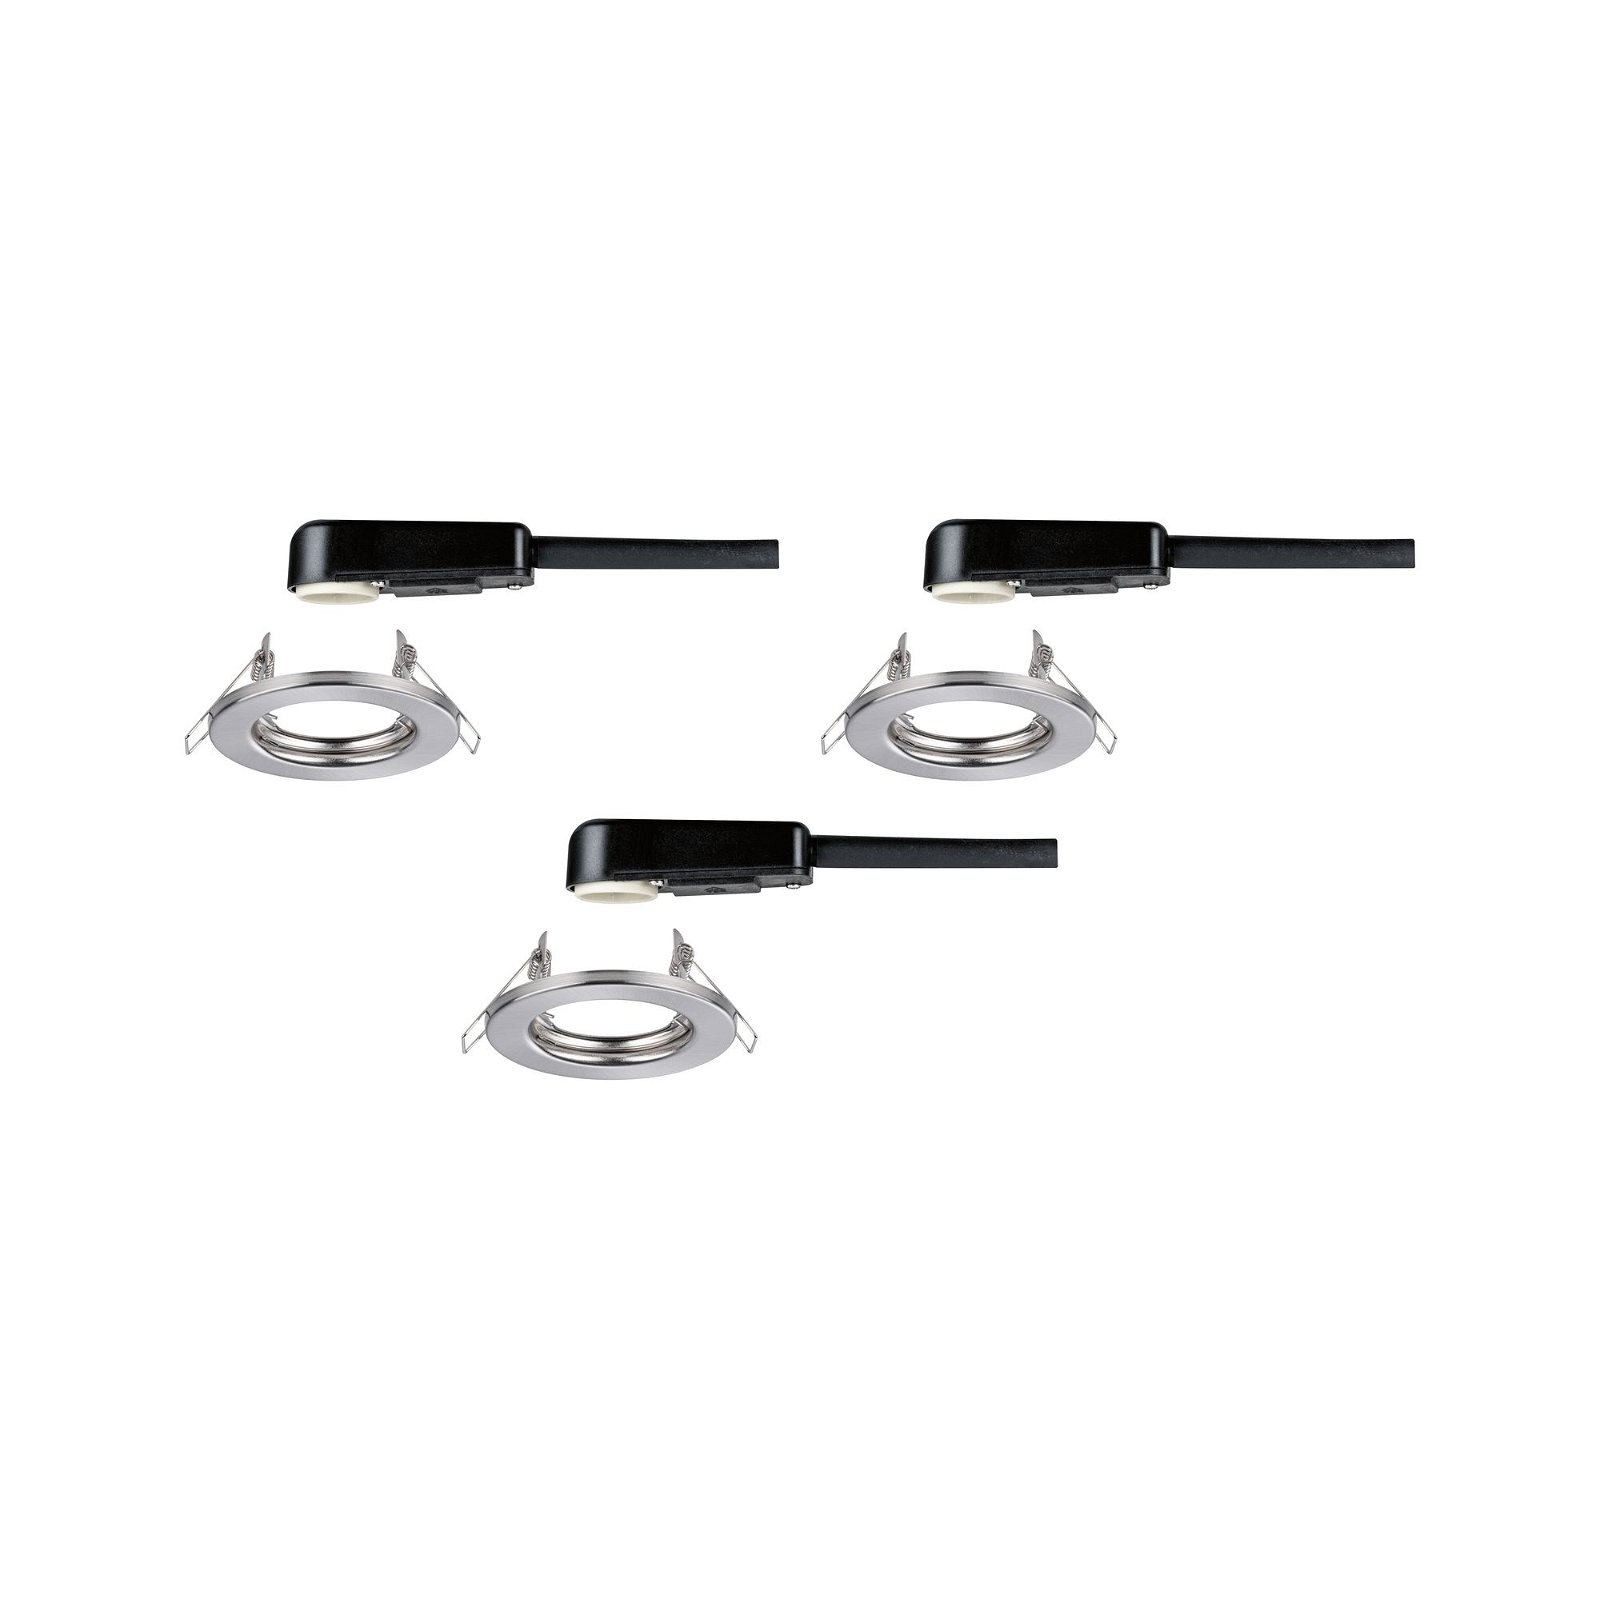 Recessed luminaire 3-piece set Rigid round 80mm GU10 max. 3x10W 230V dimmable Brushed iron